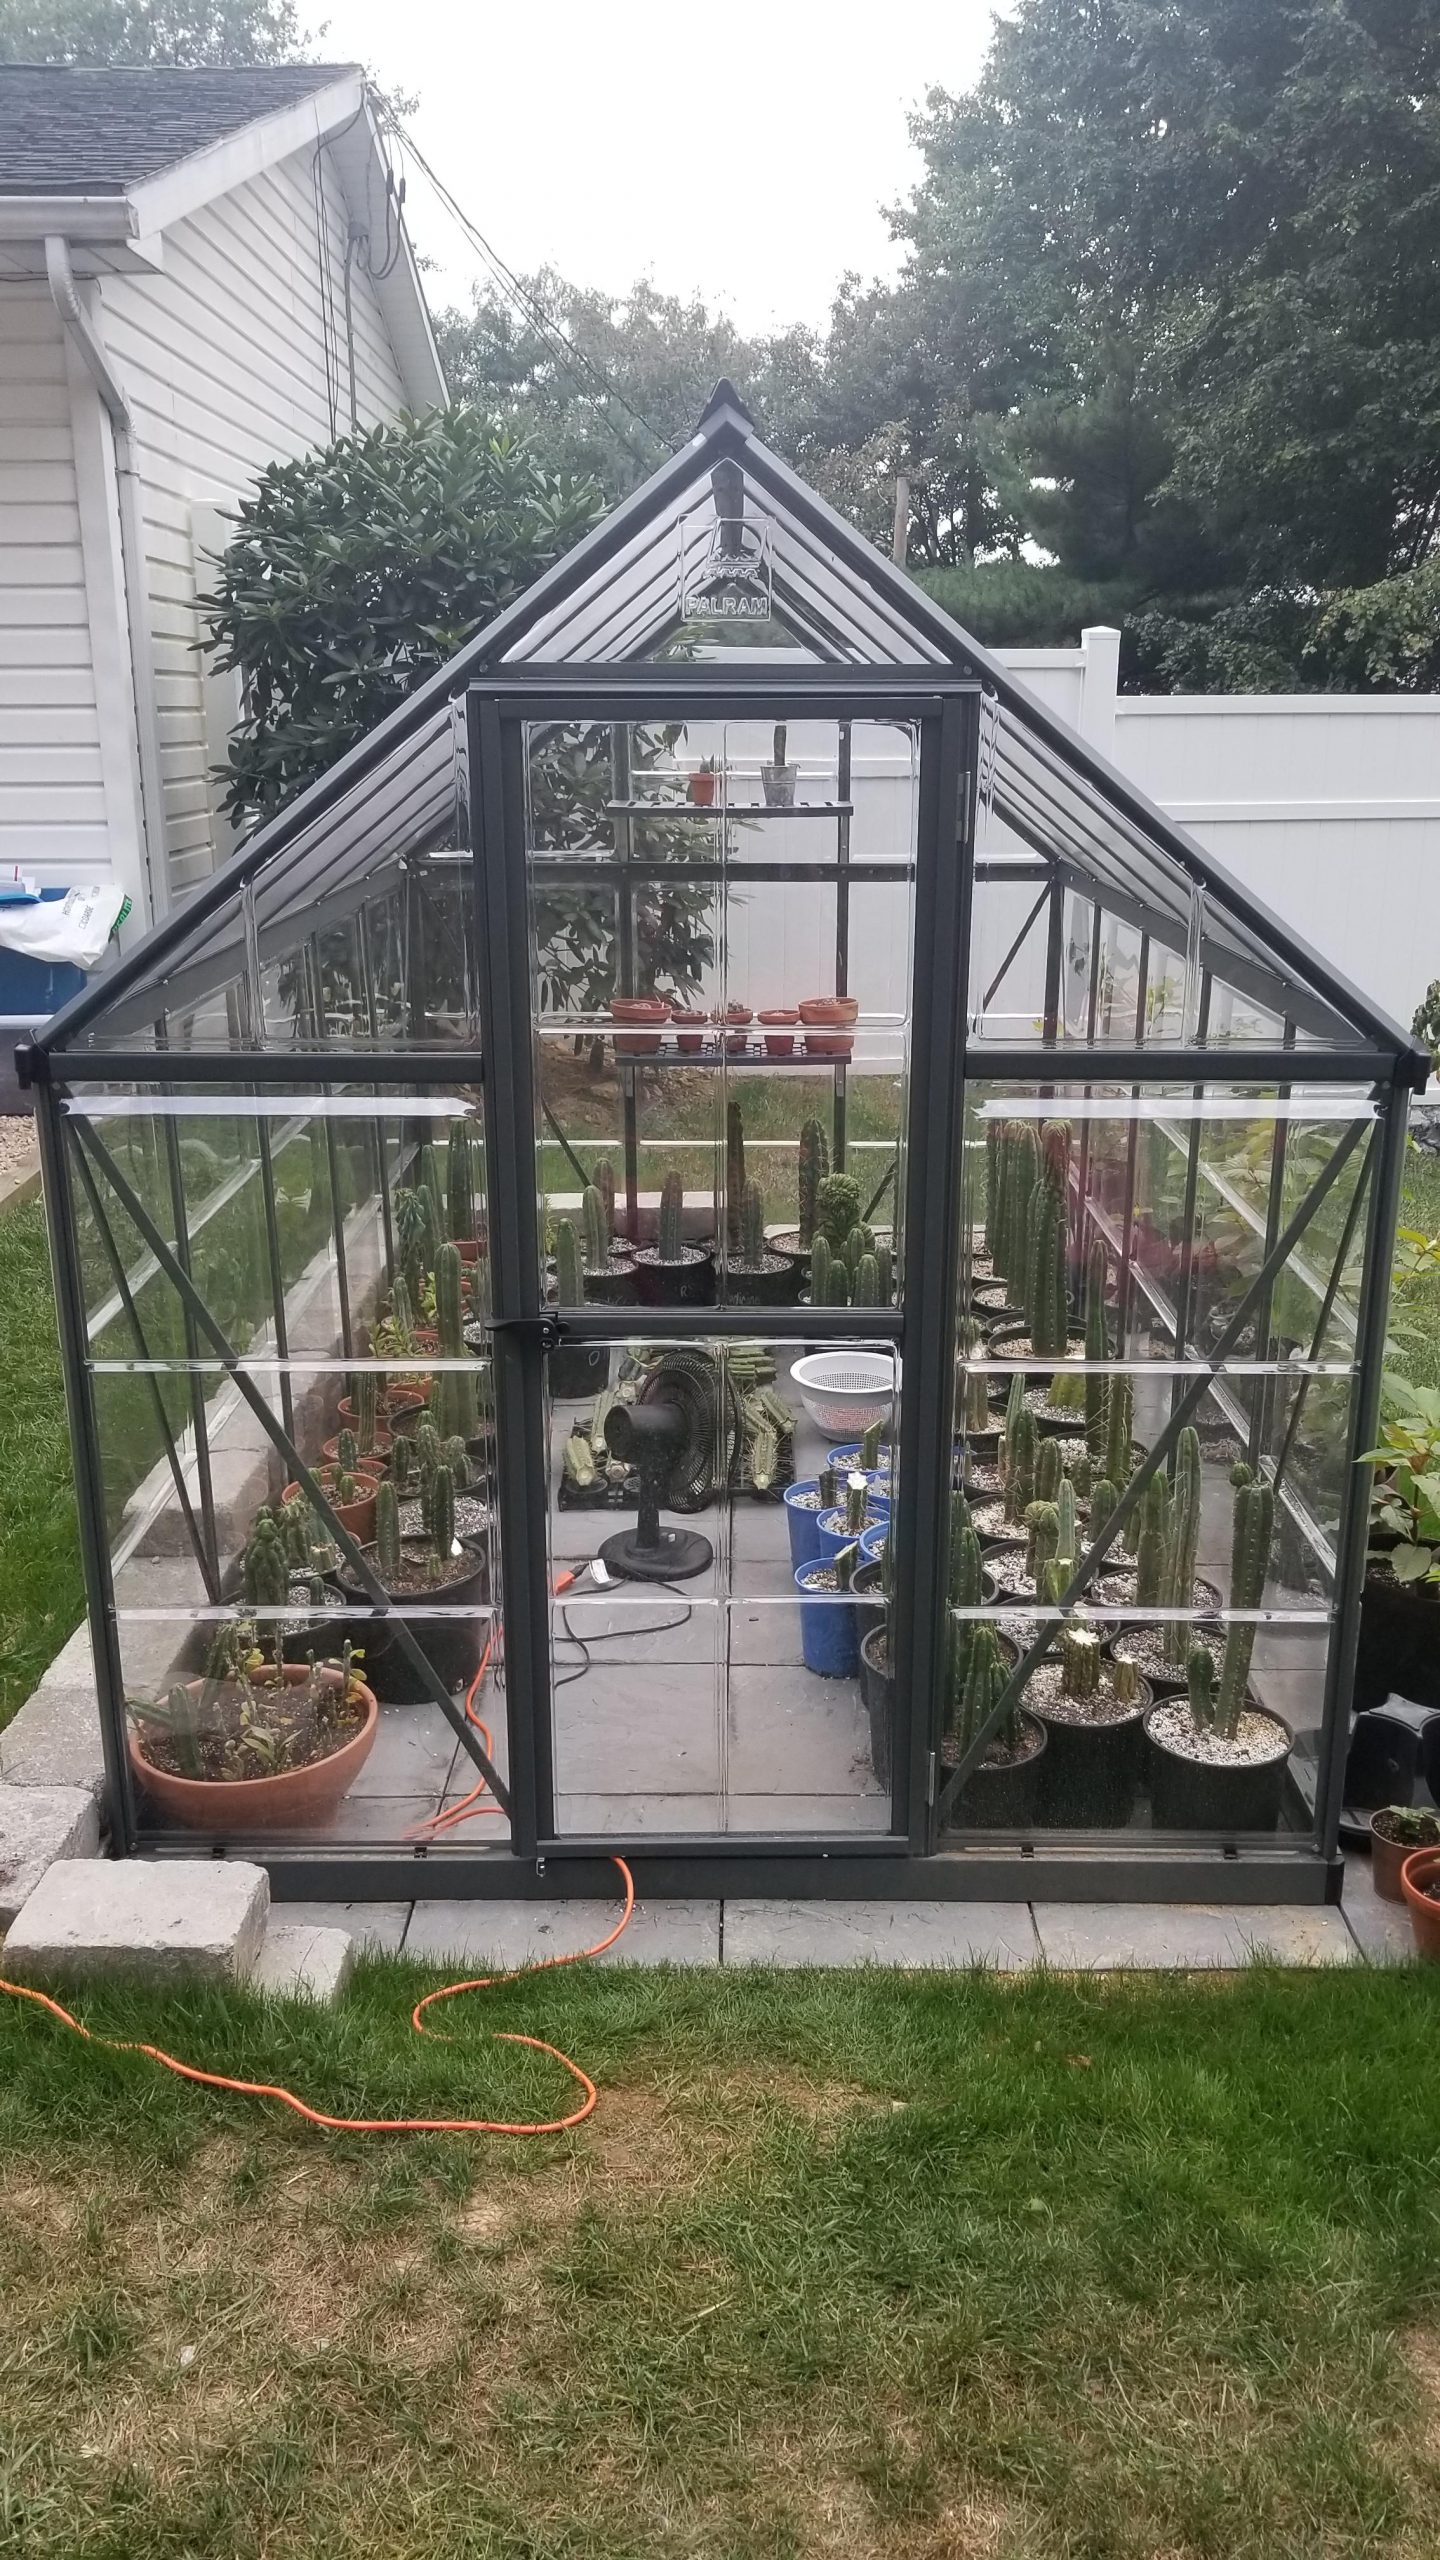 An In-Depth Review of the Palram Hybrid Greenhouse: A Perfect Balance of Functionality and Style